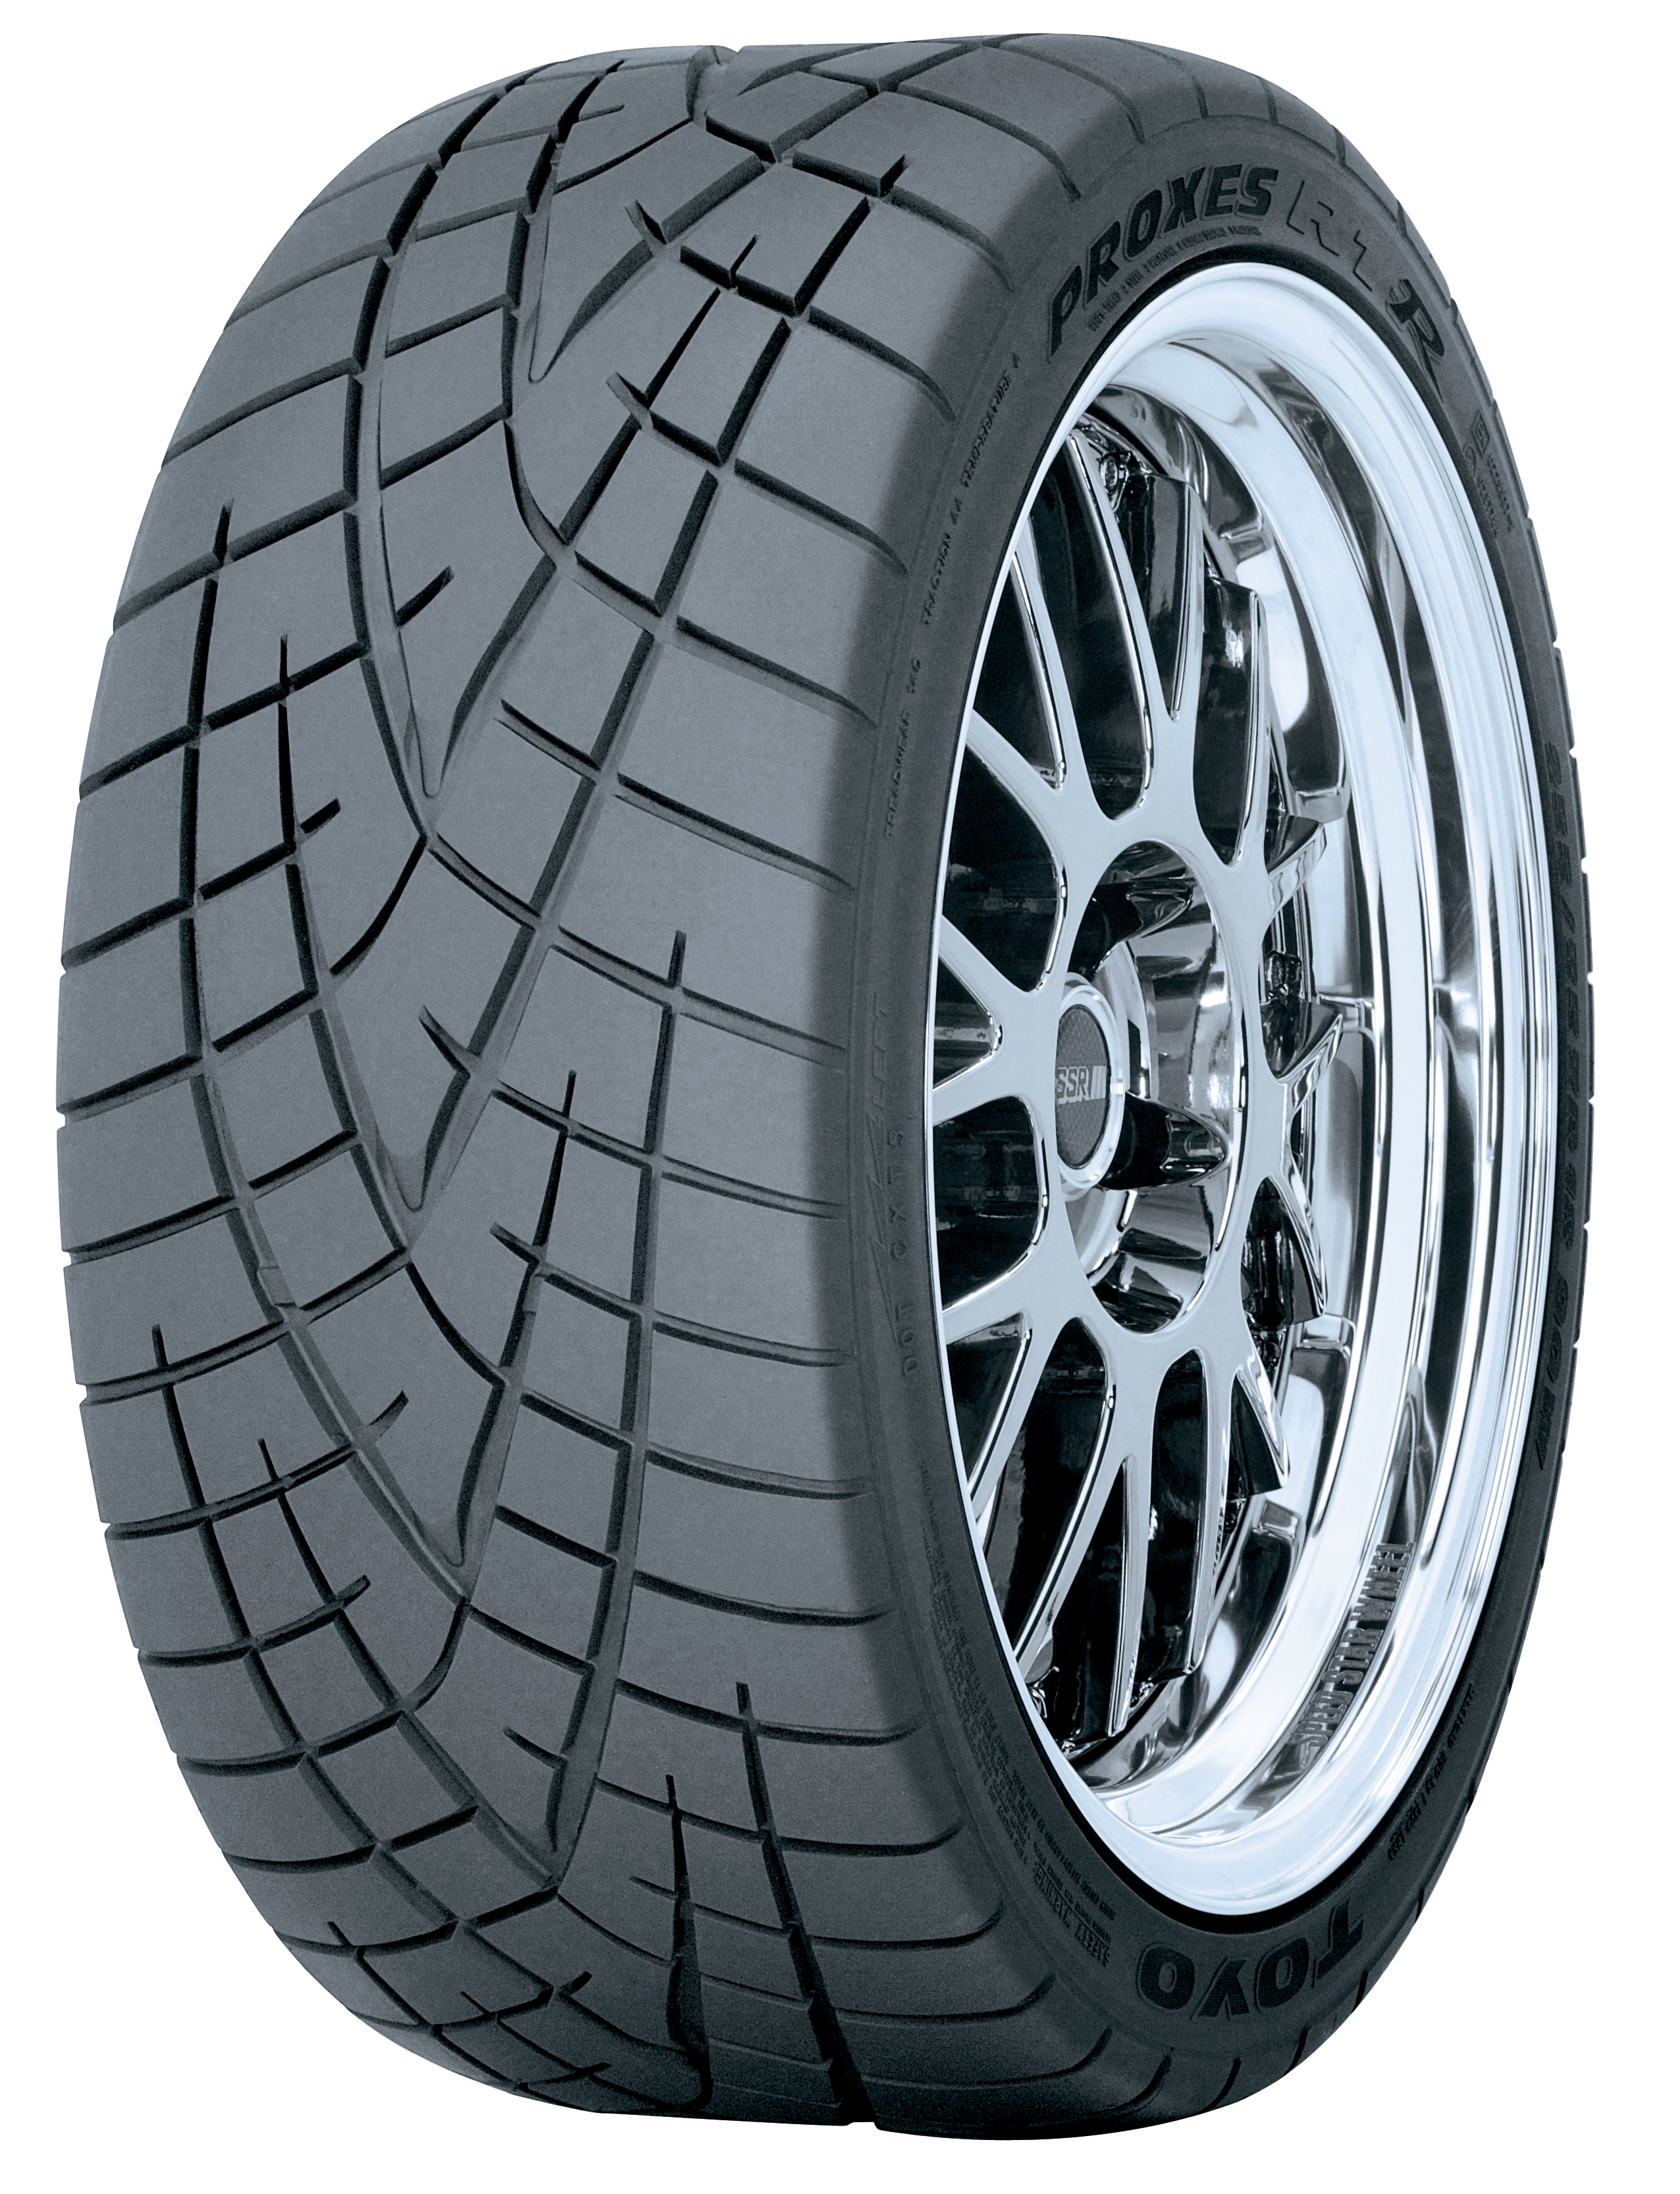 Download this Tire Images Suv Tires picture